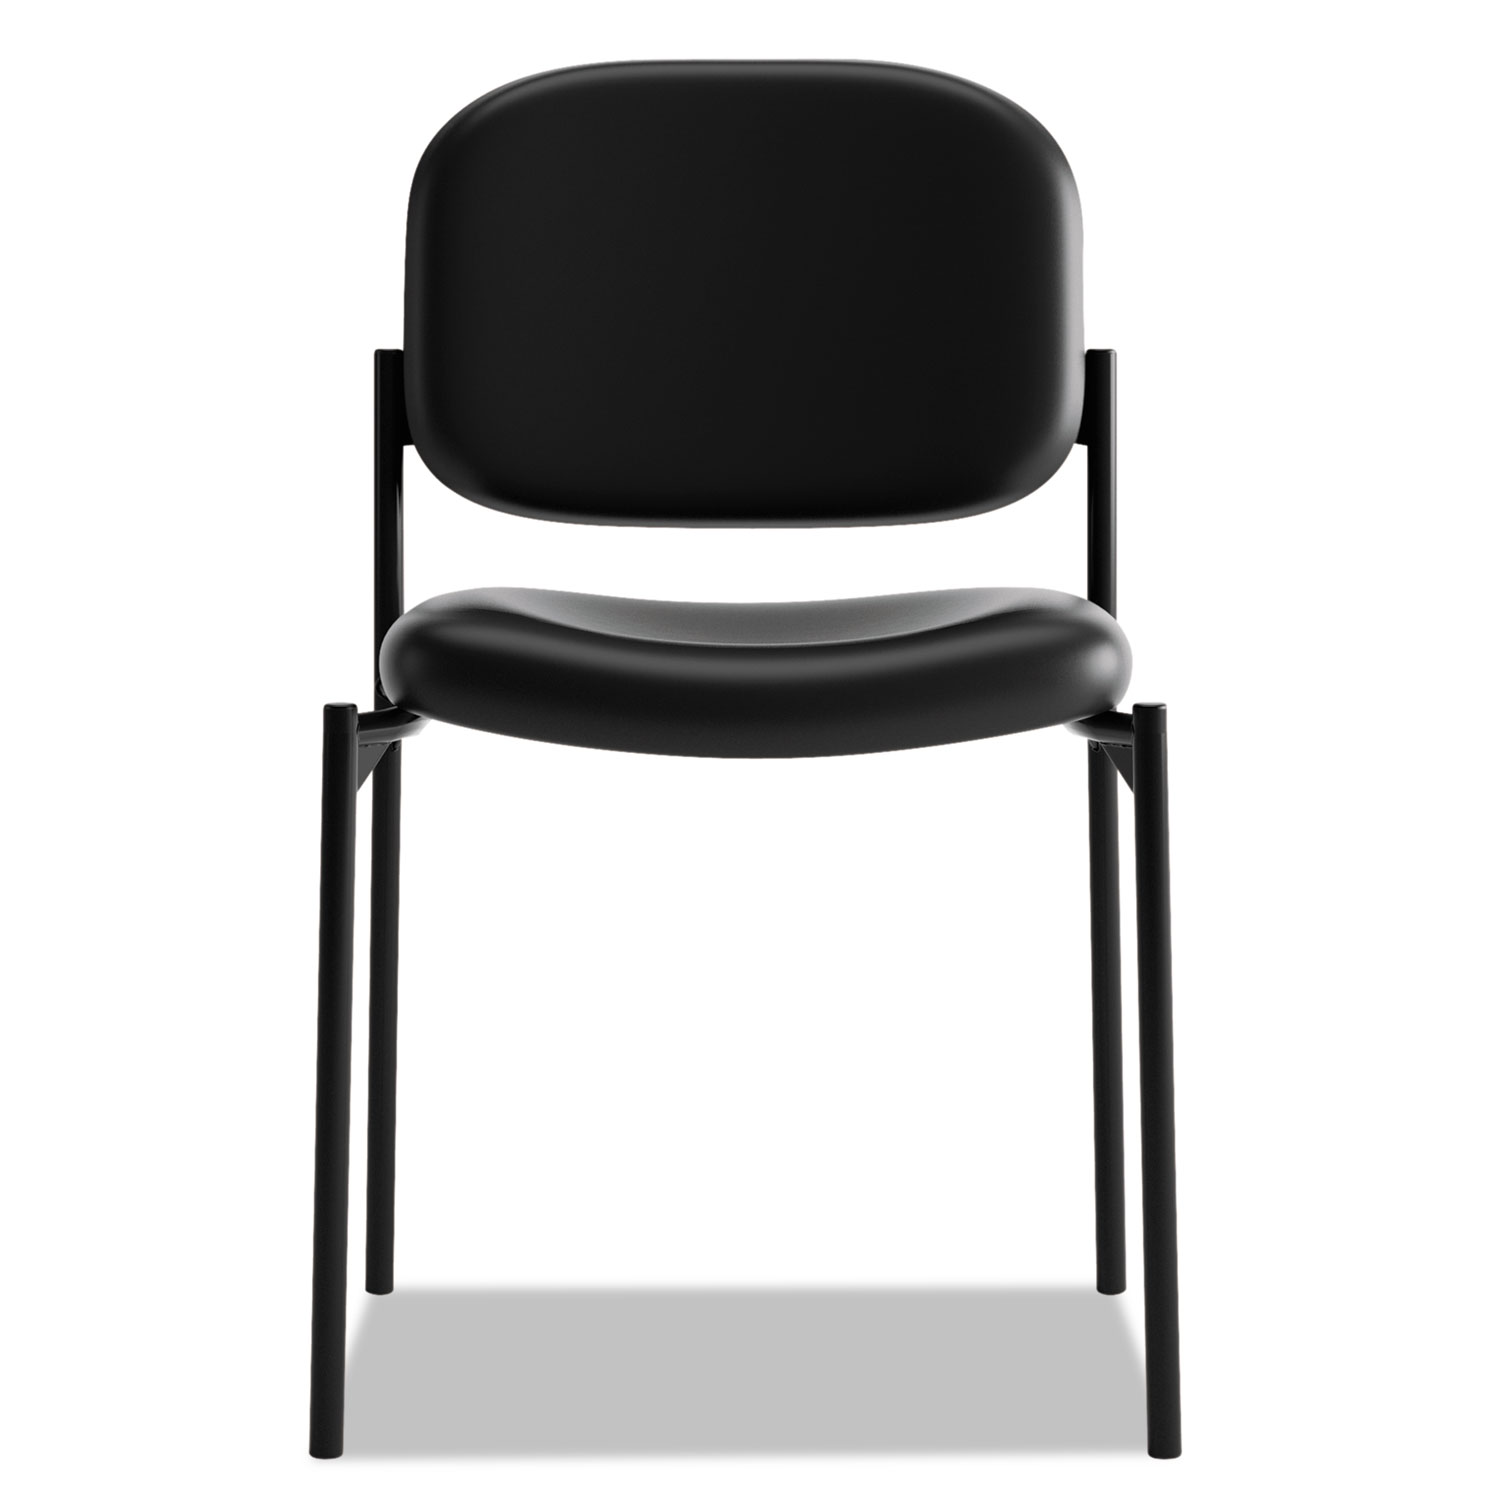 VL606 Series Stacking Armless Guest Chair, Black Leather